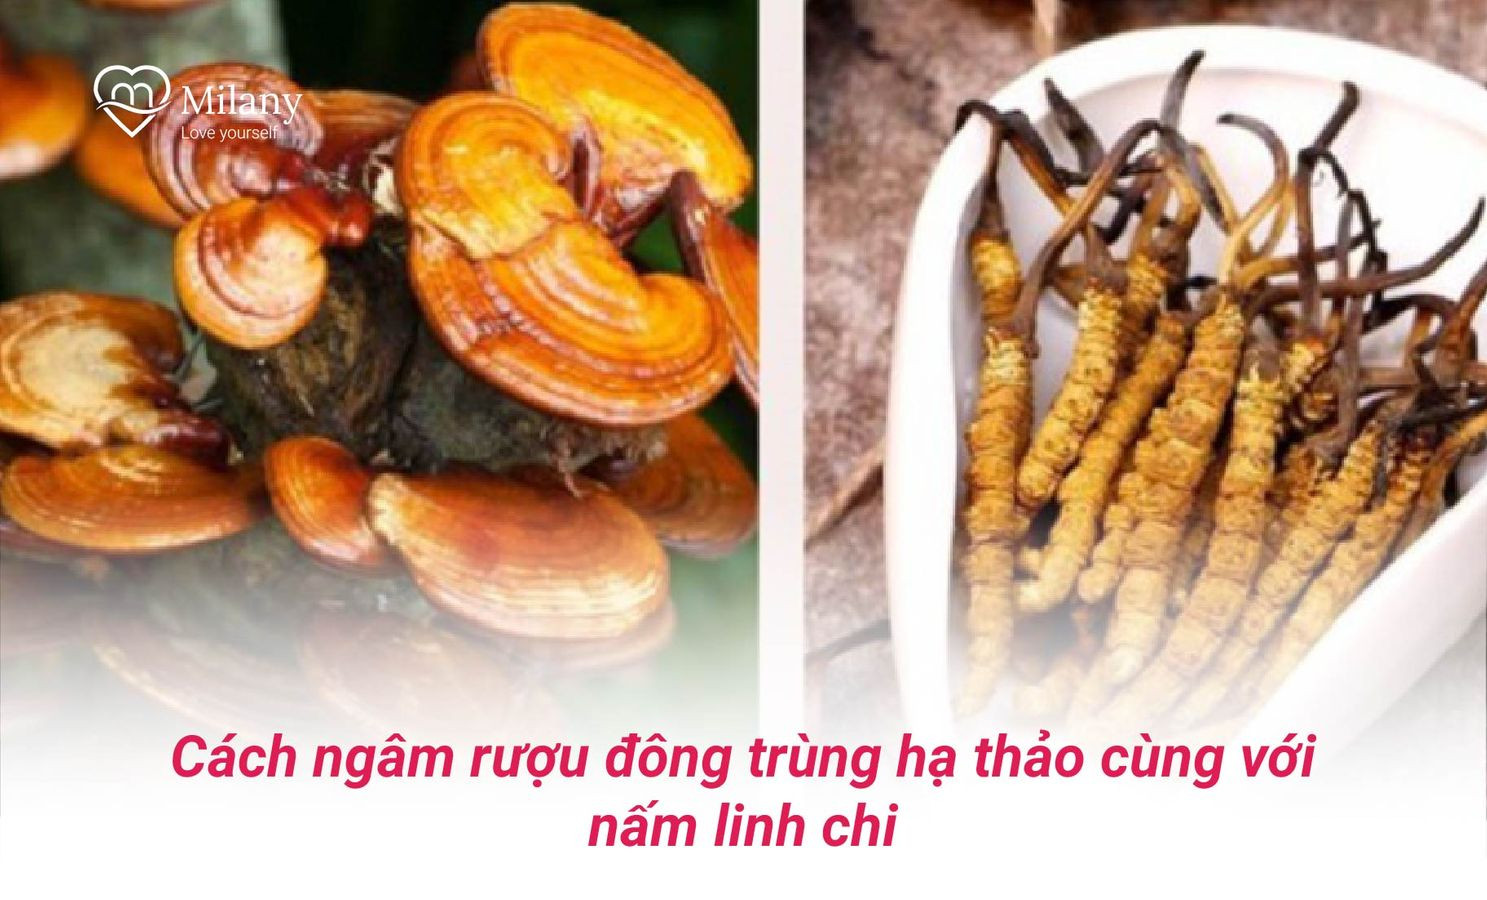 cach ngam ruou dong trung ha thao voi nam linh chi